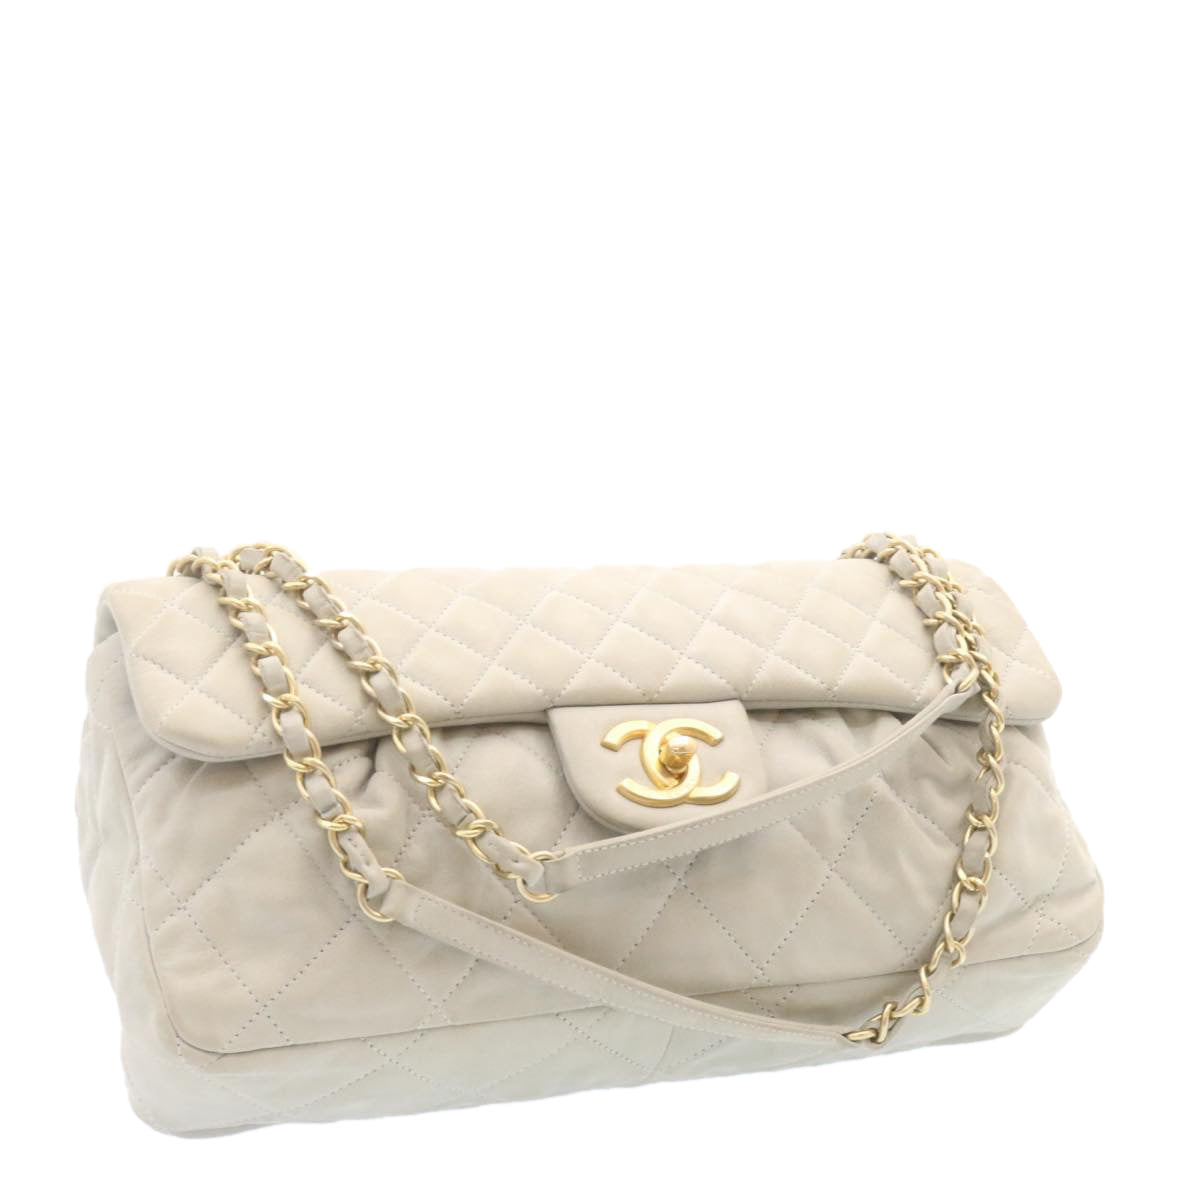 Chanel White Leather Sac Rabat shoulder bag – Luxe Supply Company